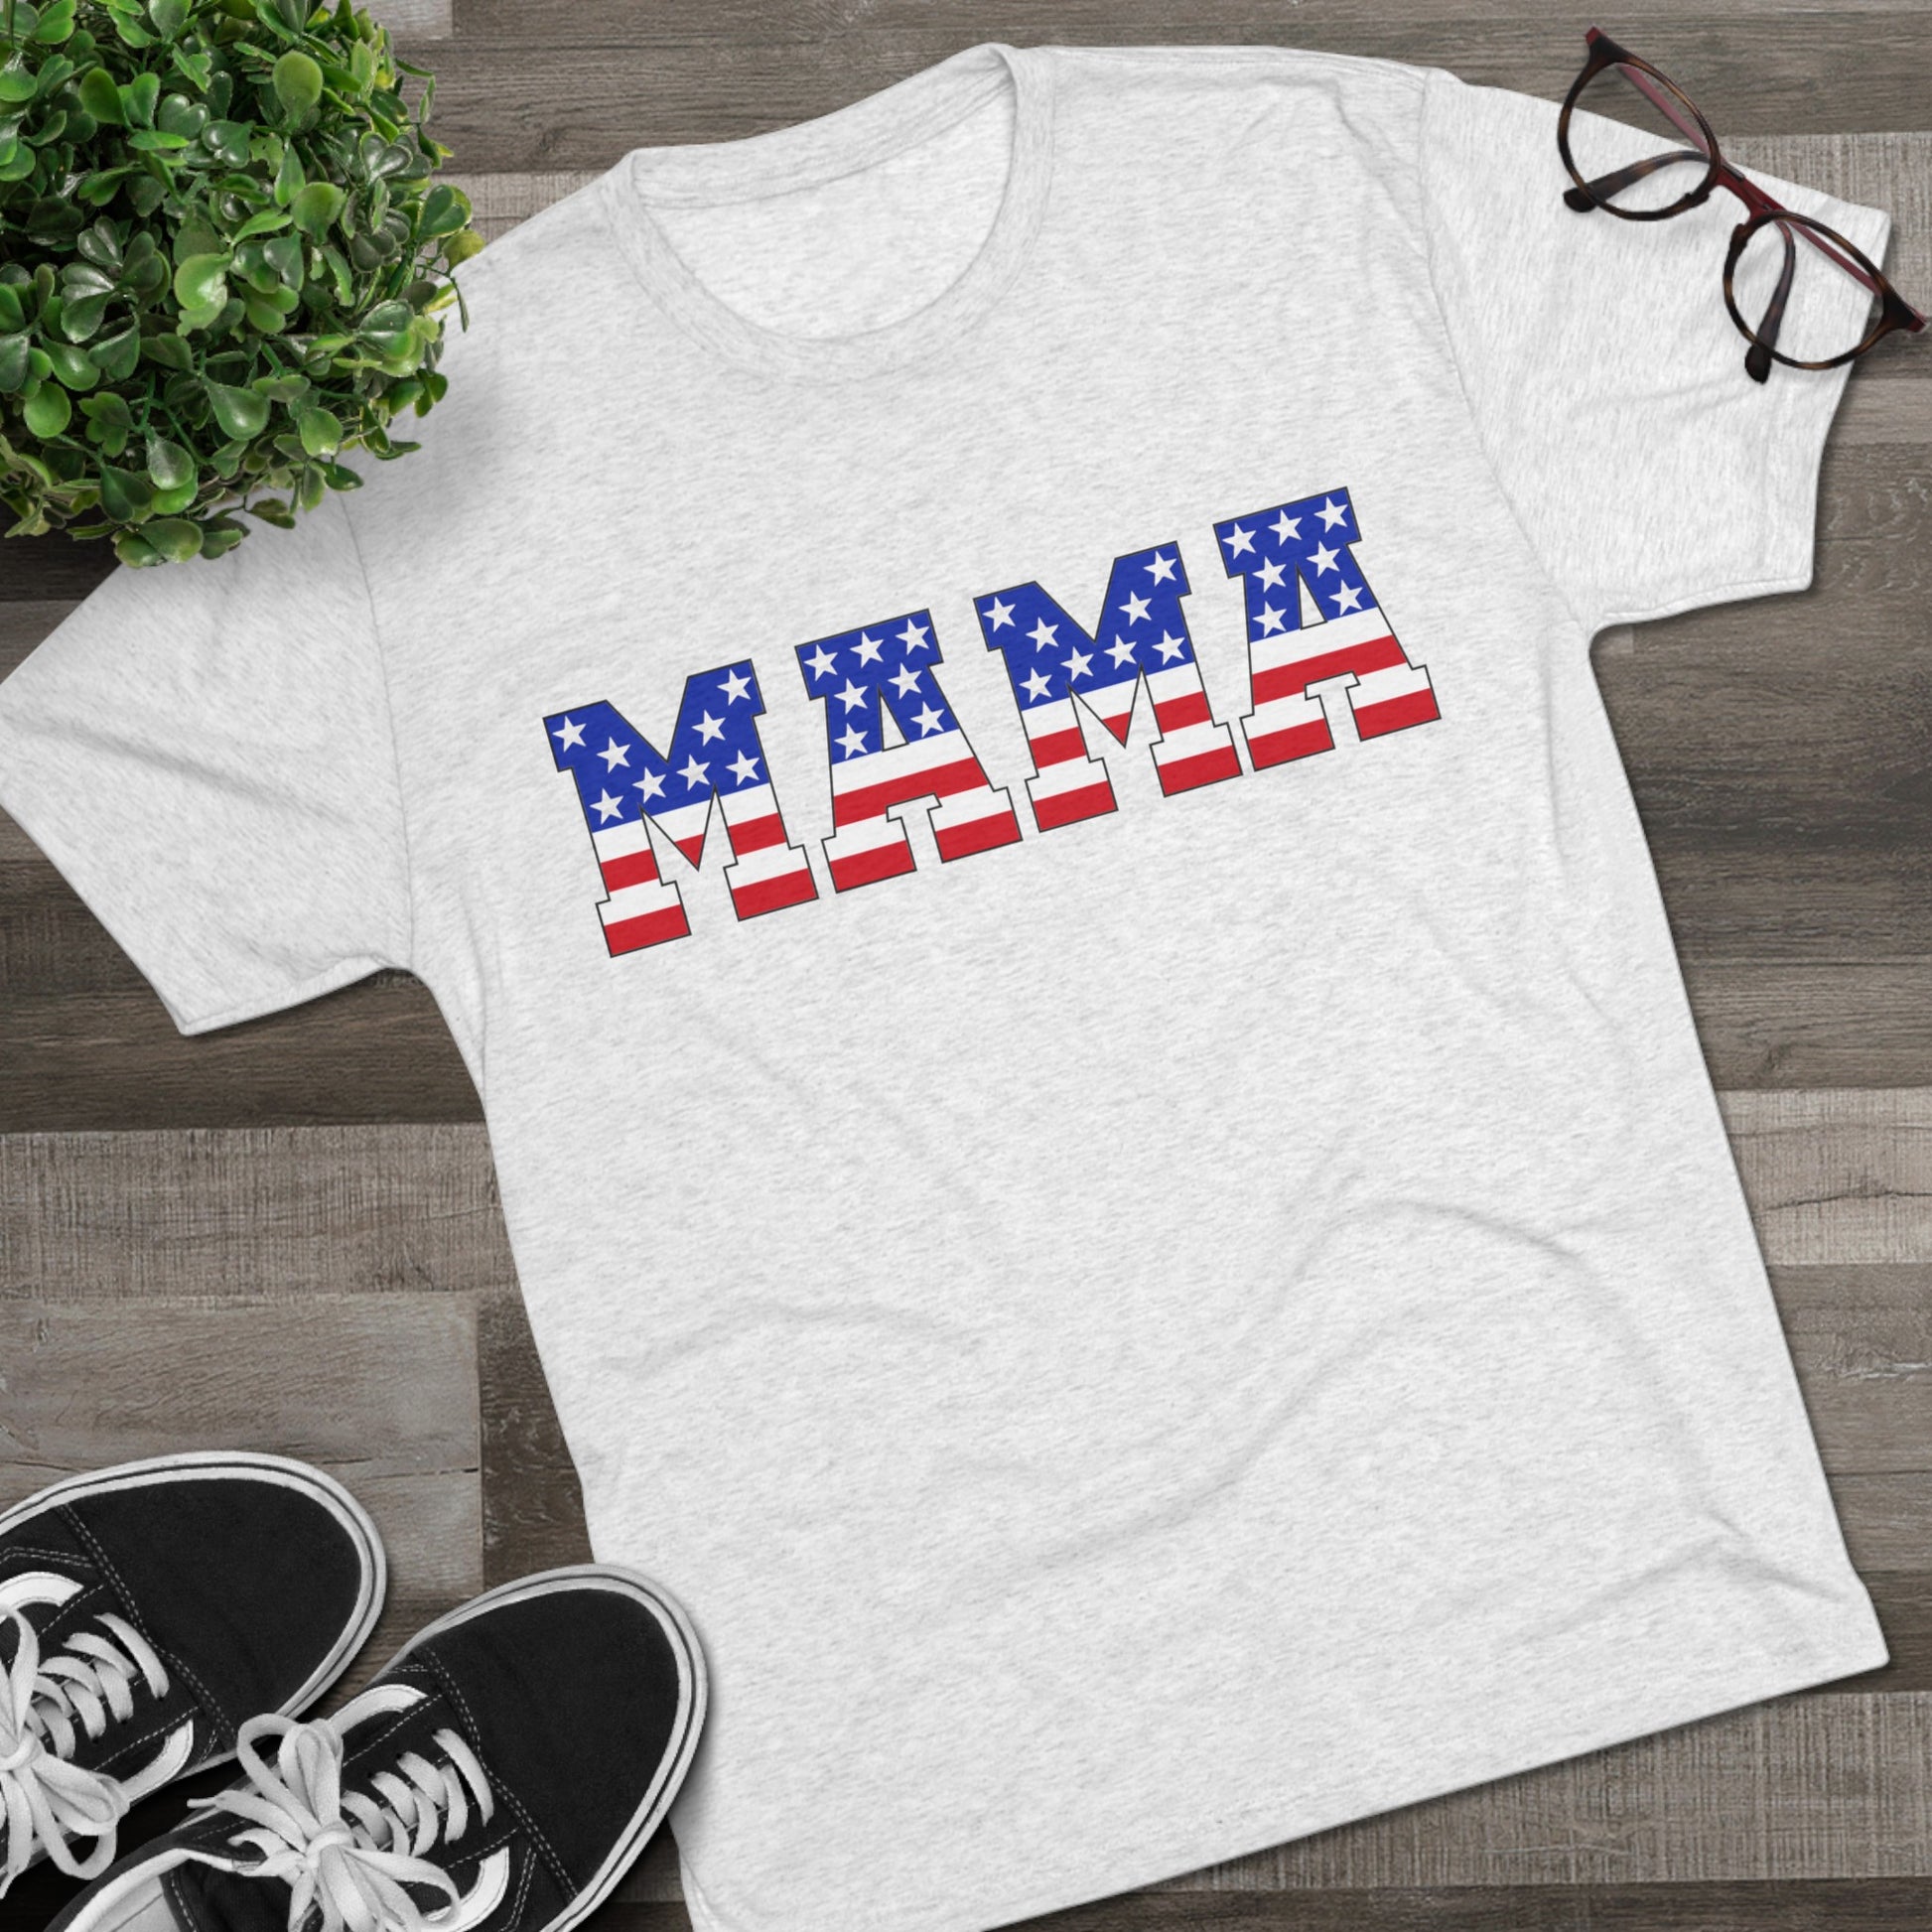 Get trendy with Patriotic Mama Tri-Blend Crew Tee - T-Shirt available at Good Gift Company. Grab yours for $18.96 today!